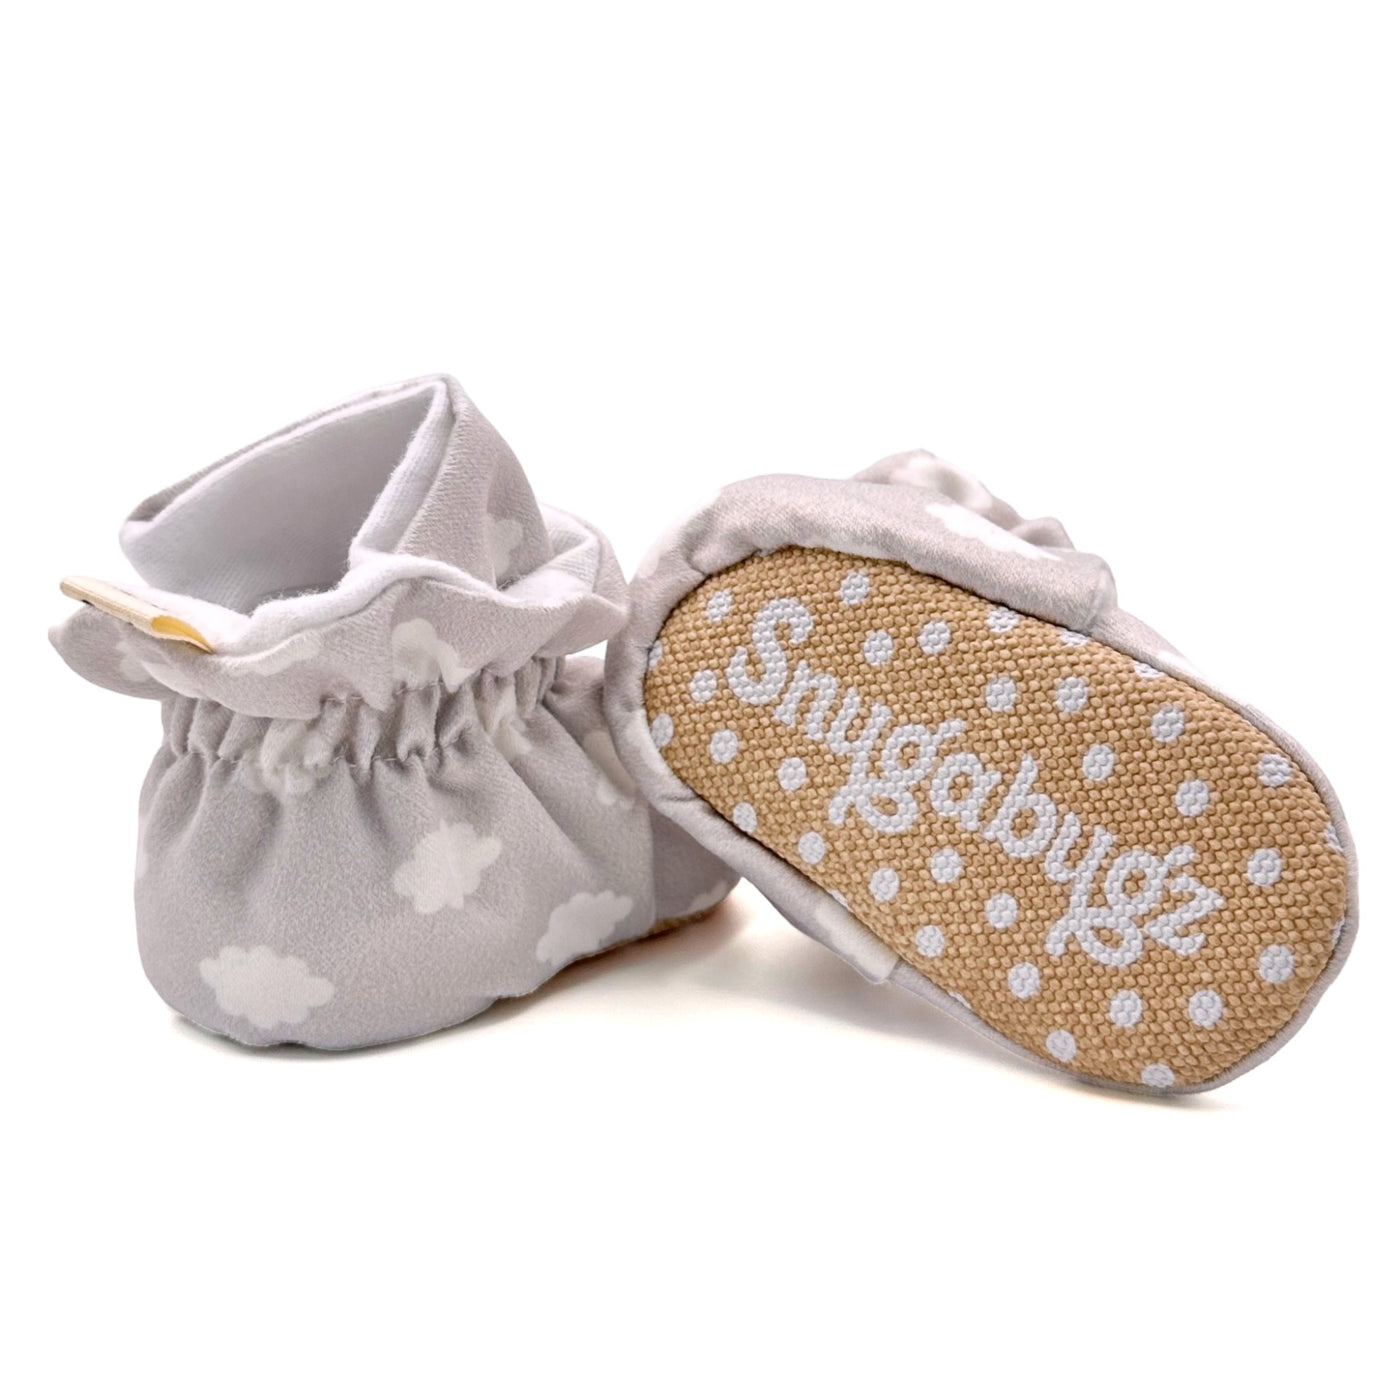 Stay-on, Non-Slip, Baby Booties - Grey Clouds - Snugabugz